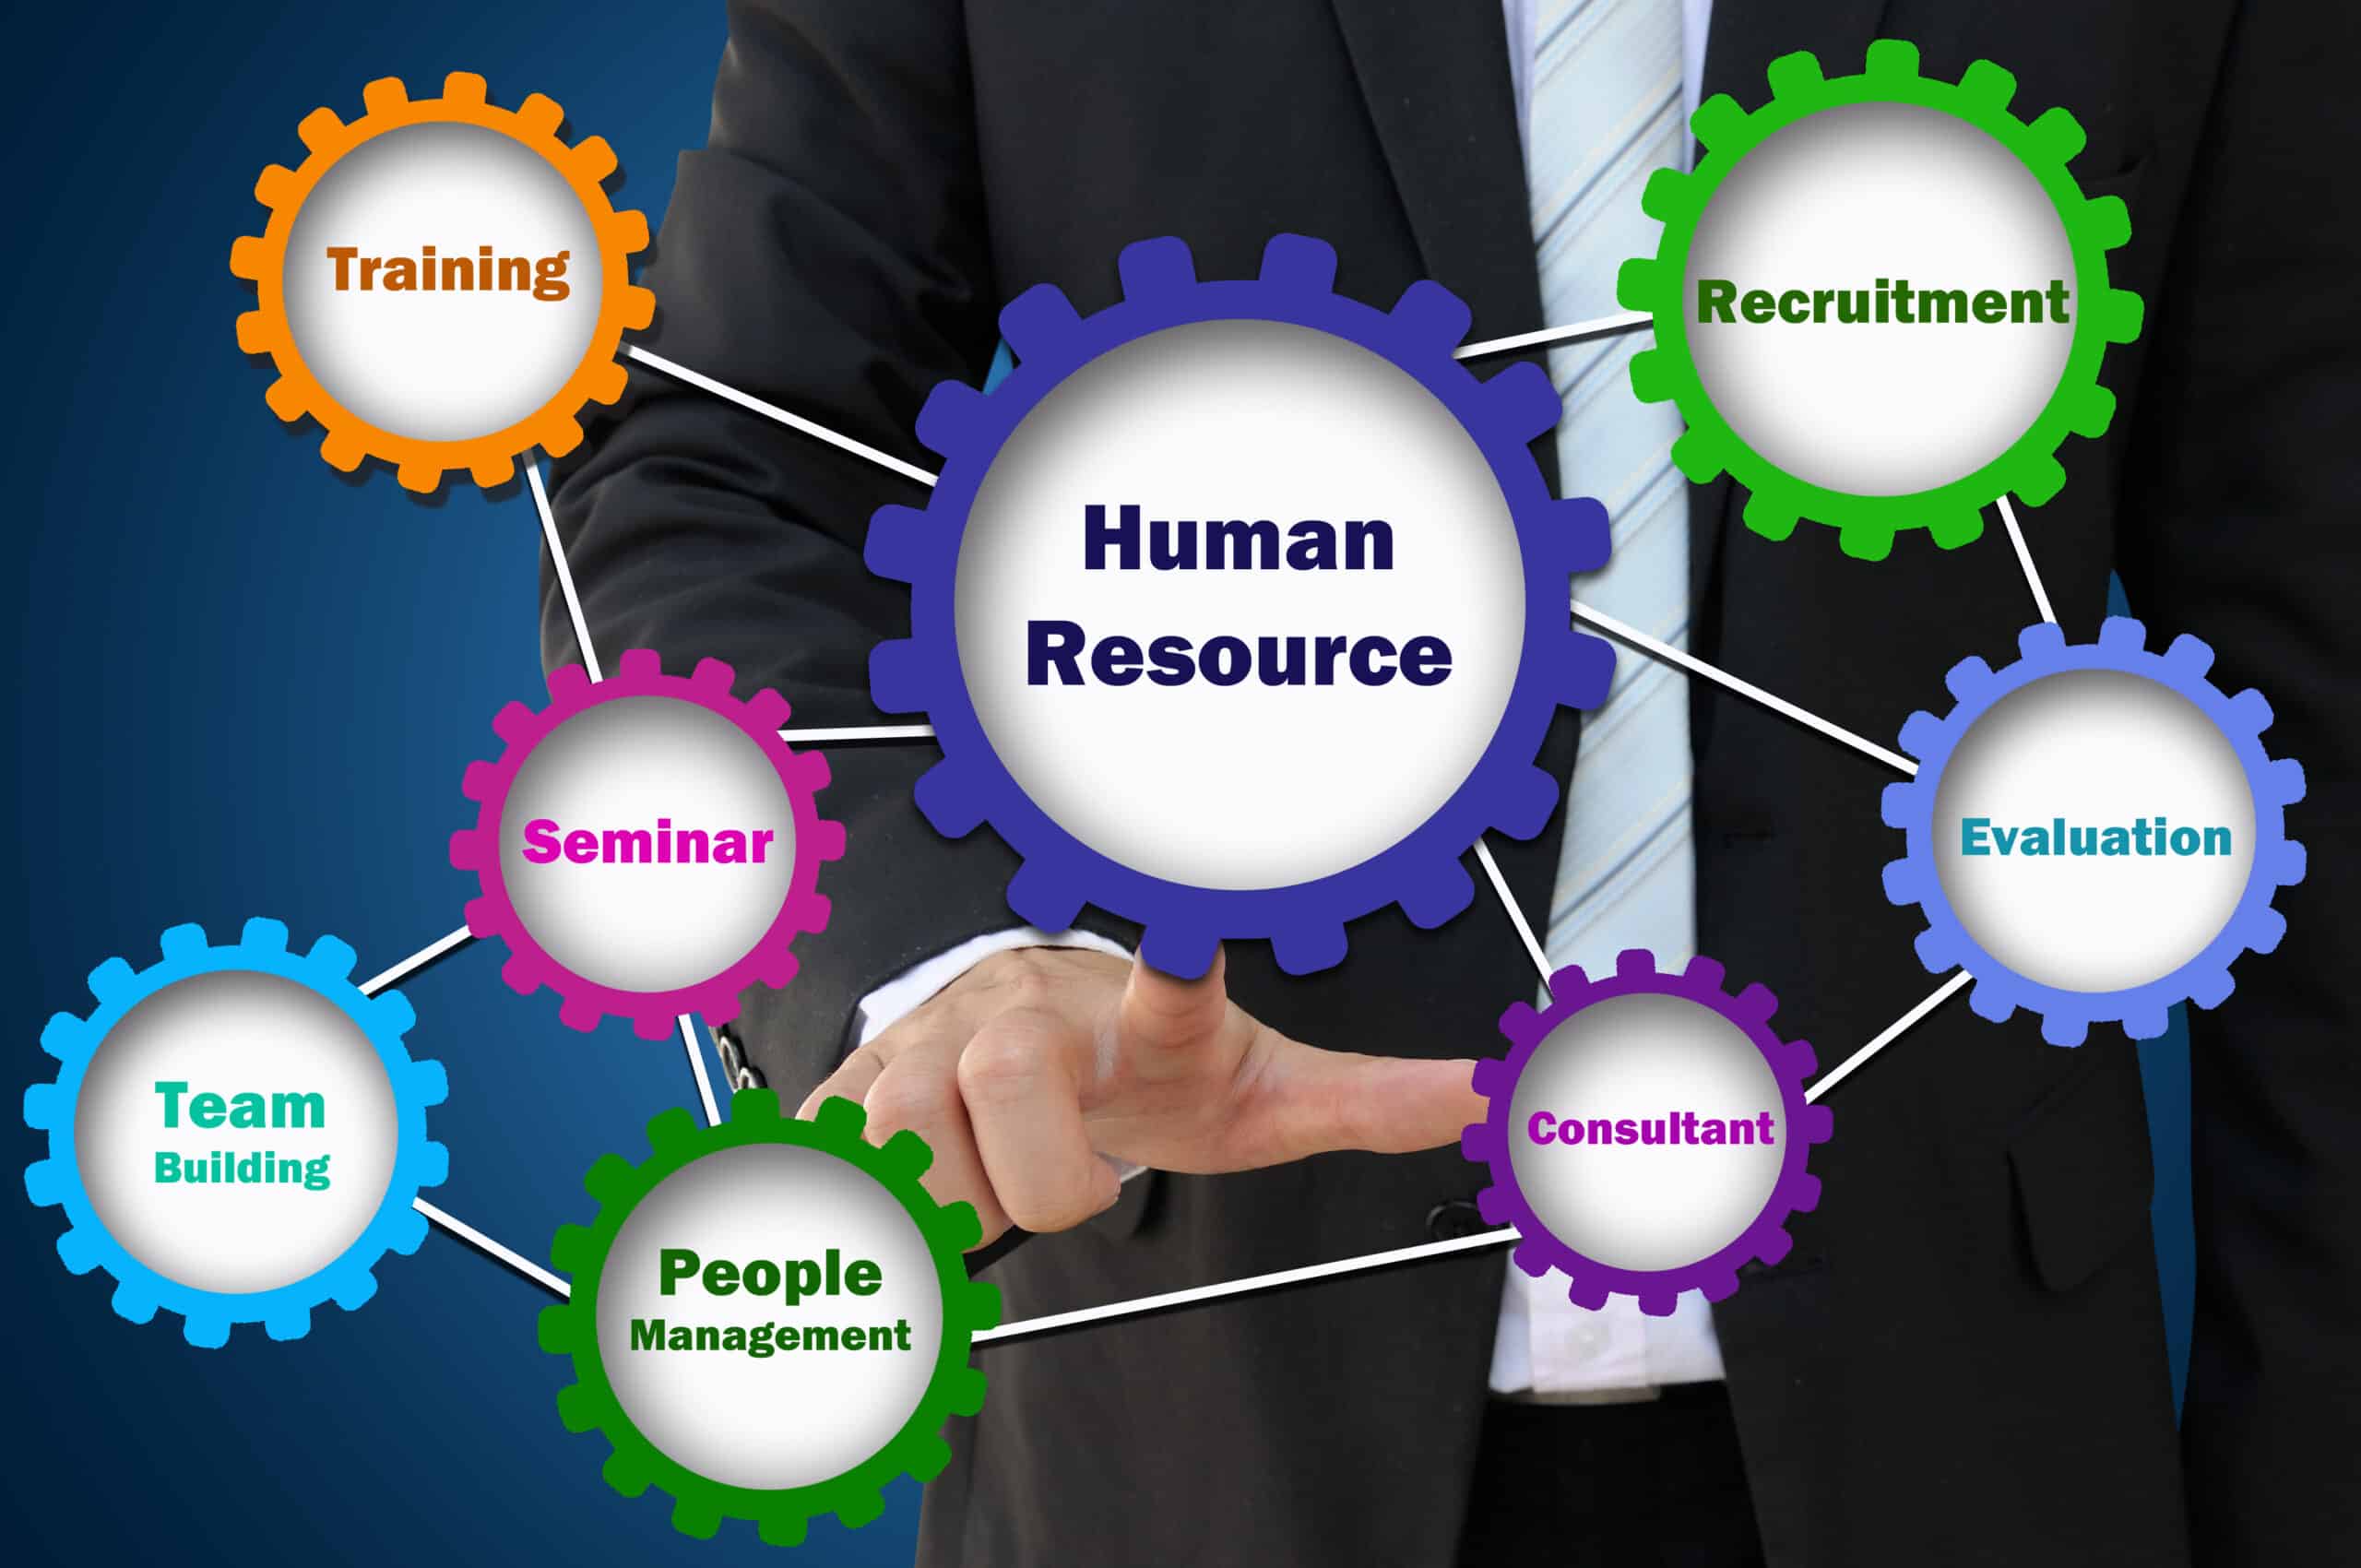 HR consulting by TEP.Global, founded by Dr. Vic, focuses on people centered Team Dynamics and Organizational Culture; hire and promote talent in the right way.